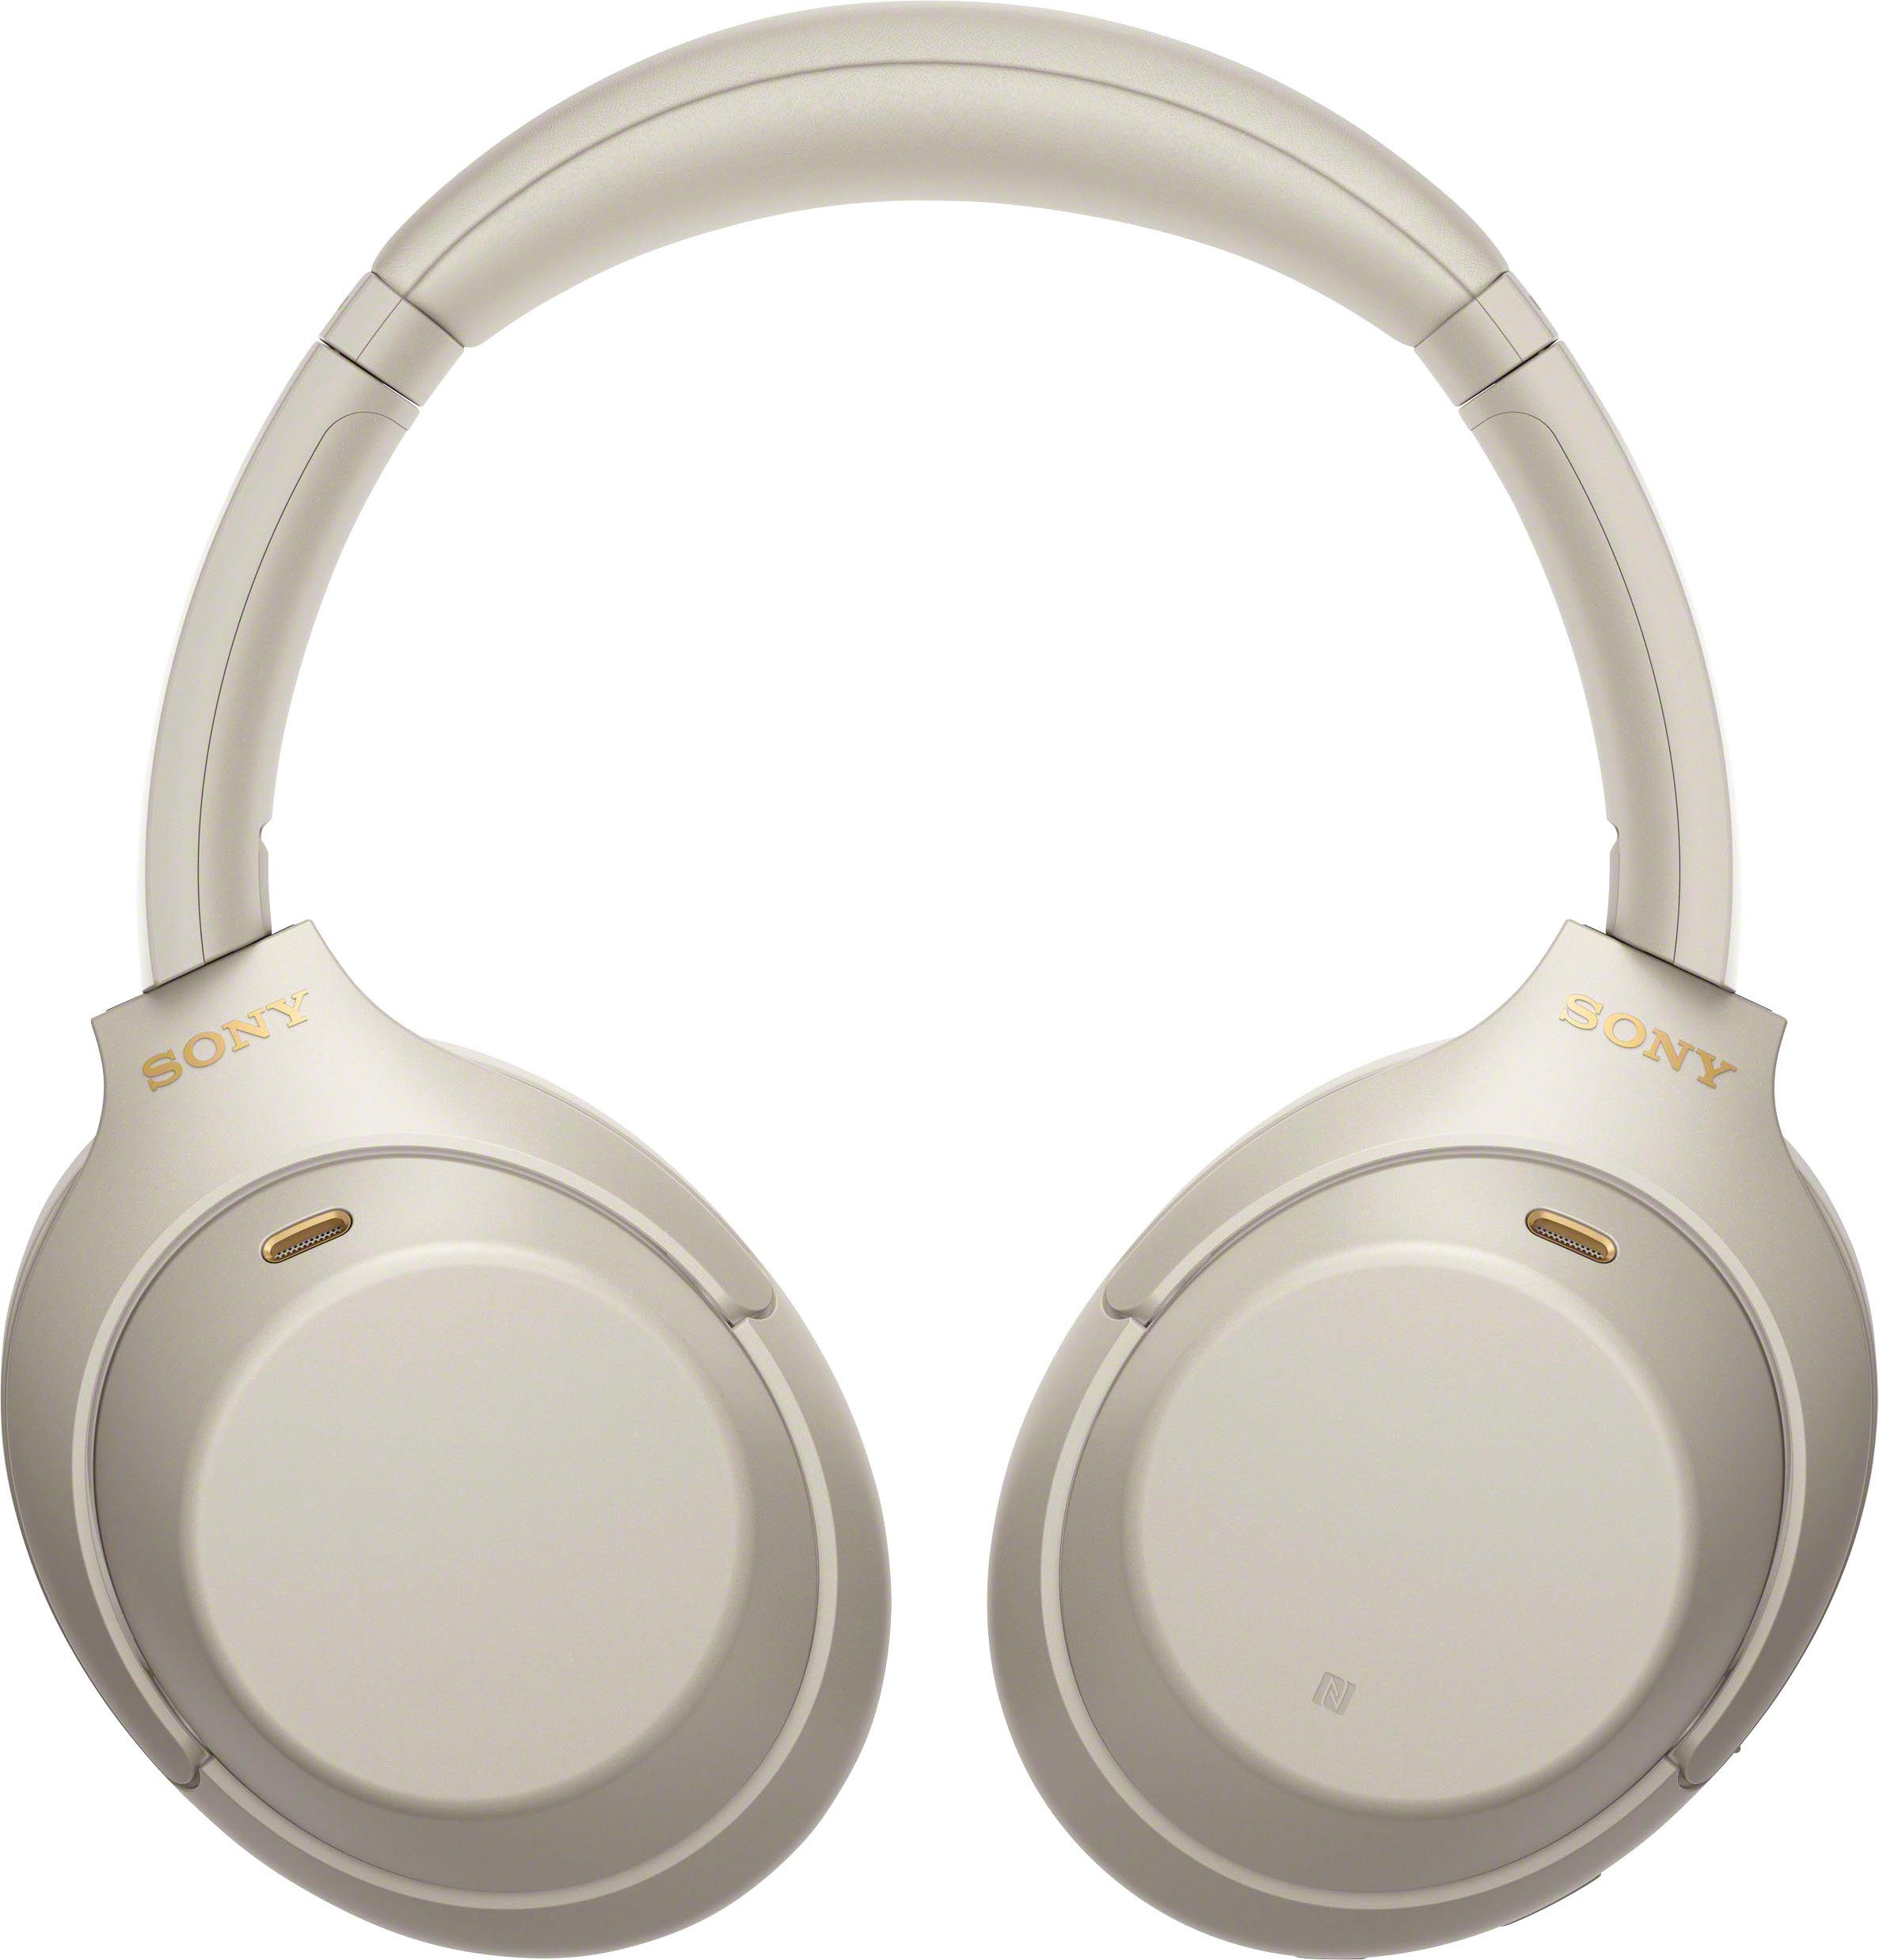 via kabelloser Silber Verbindung Sensor, Sony One-Touch Bluetooth, NFC, Schnellladefunktion) (Noise-Cancelling, Over-Ear-Kopfhörer NFC, WH-1000XM4 Touch